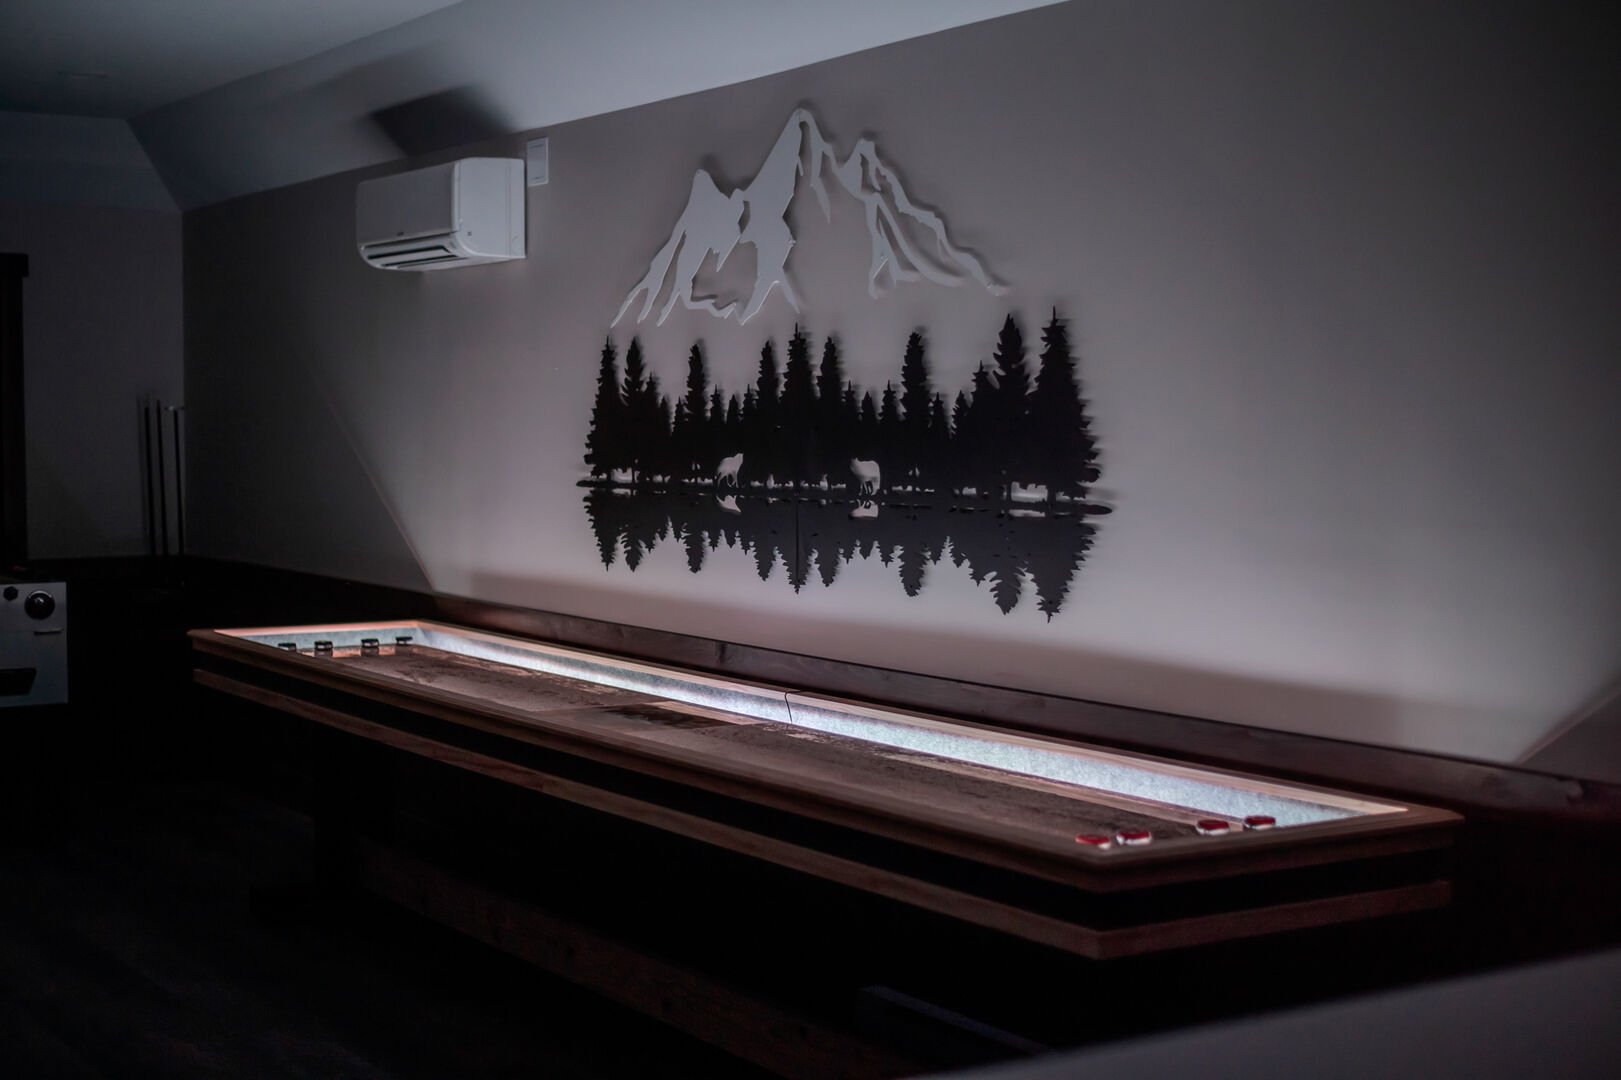 Late Night Fun and Games
Just incase you want to Host a Midnight Shuffleboard Tourney...